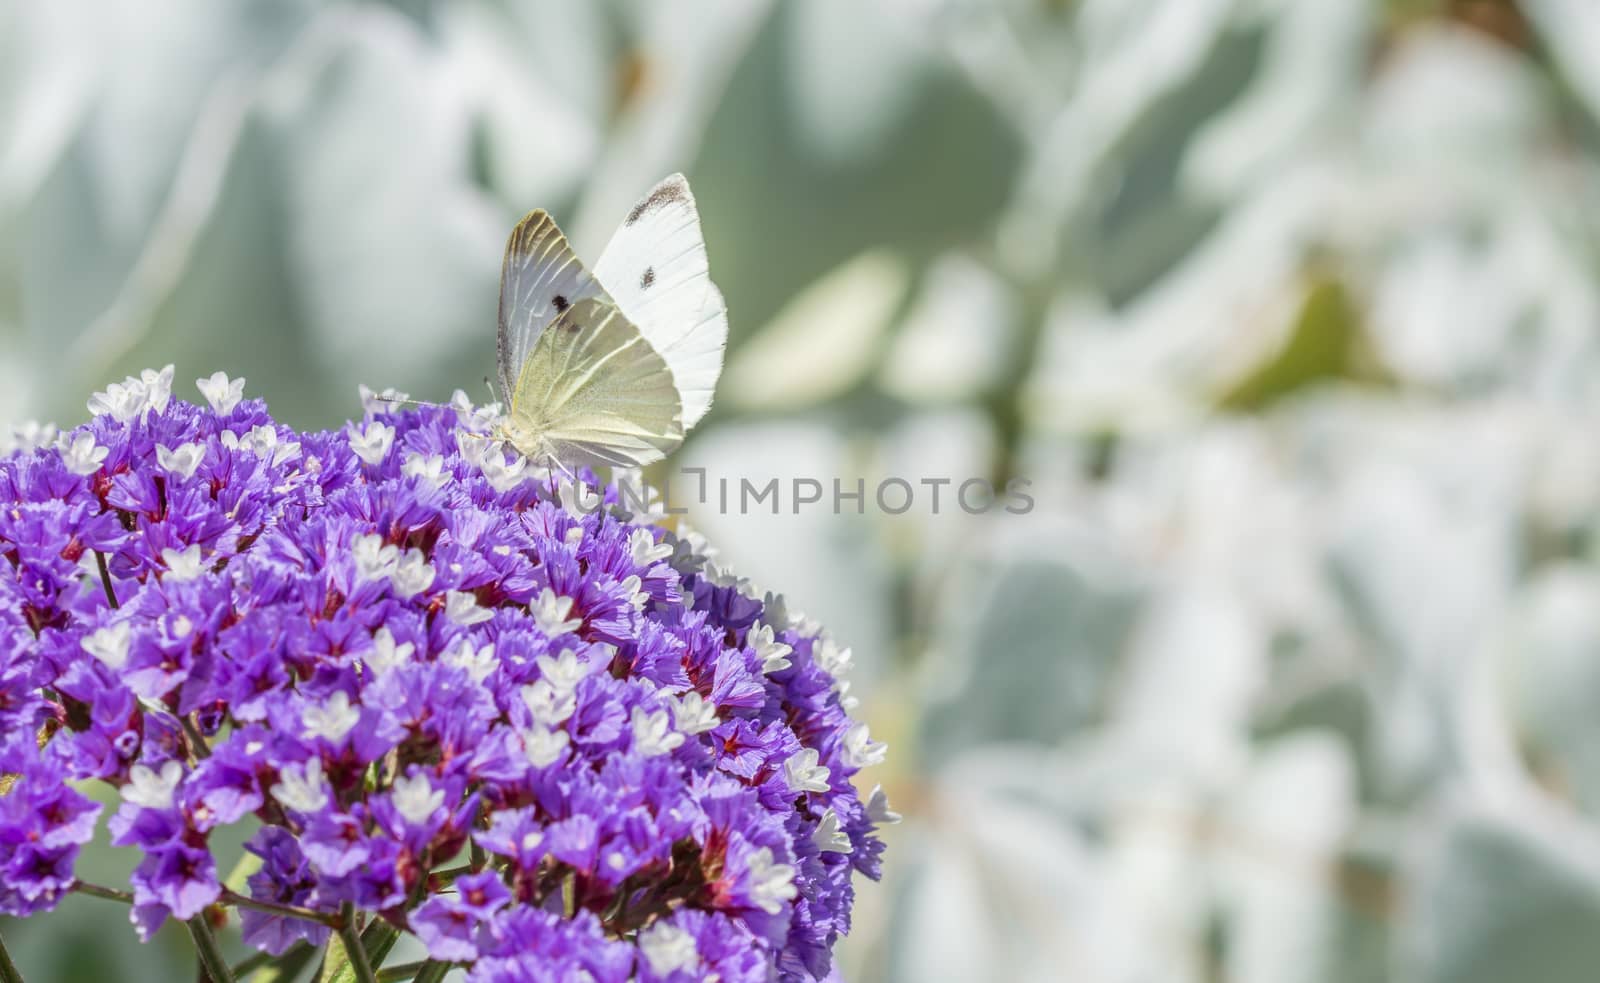 The butterfly on the blue flower in the botanical garden